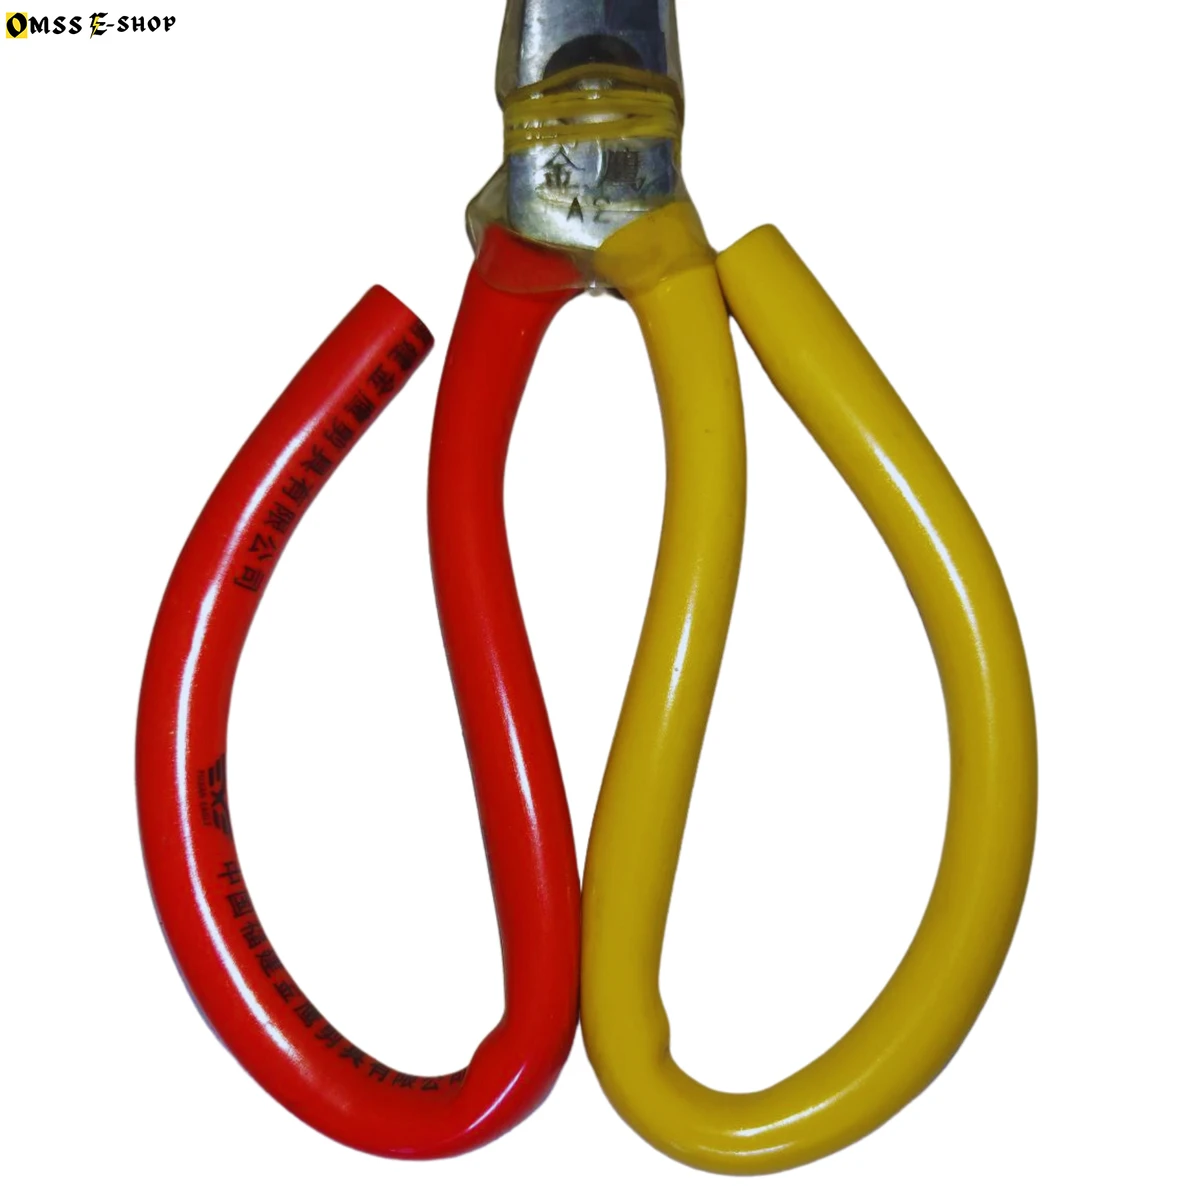 Original Stainless Steel Scissor Red and Yellow Handled For Crafting, Garments, Sewing or Thread